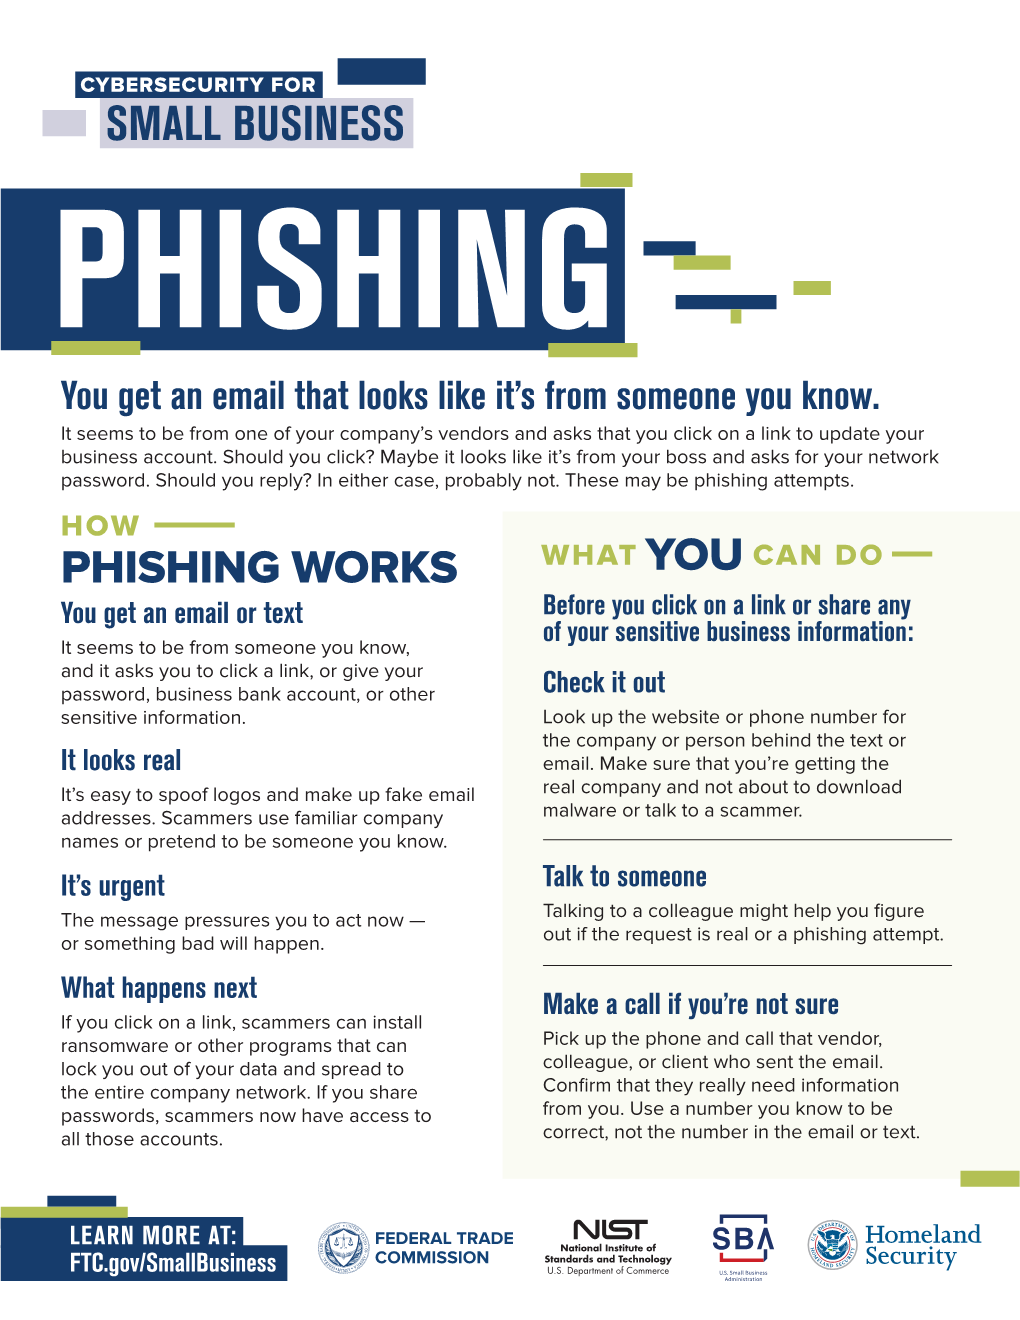 Cybersecurity for Small Business: Phishing